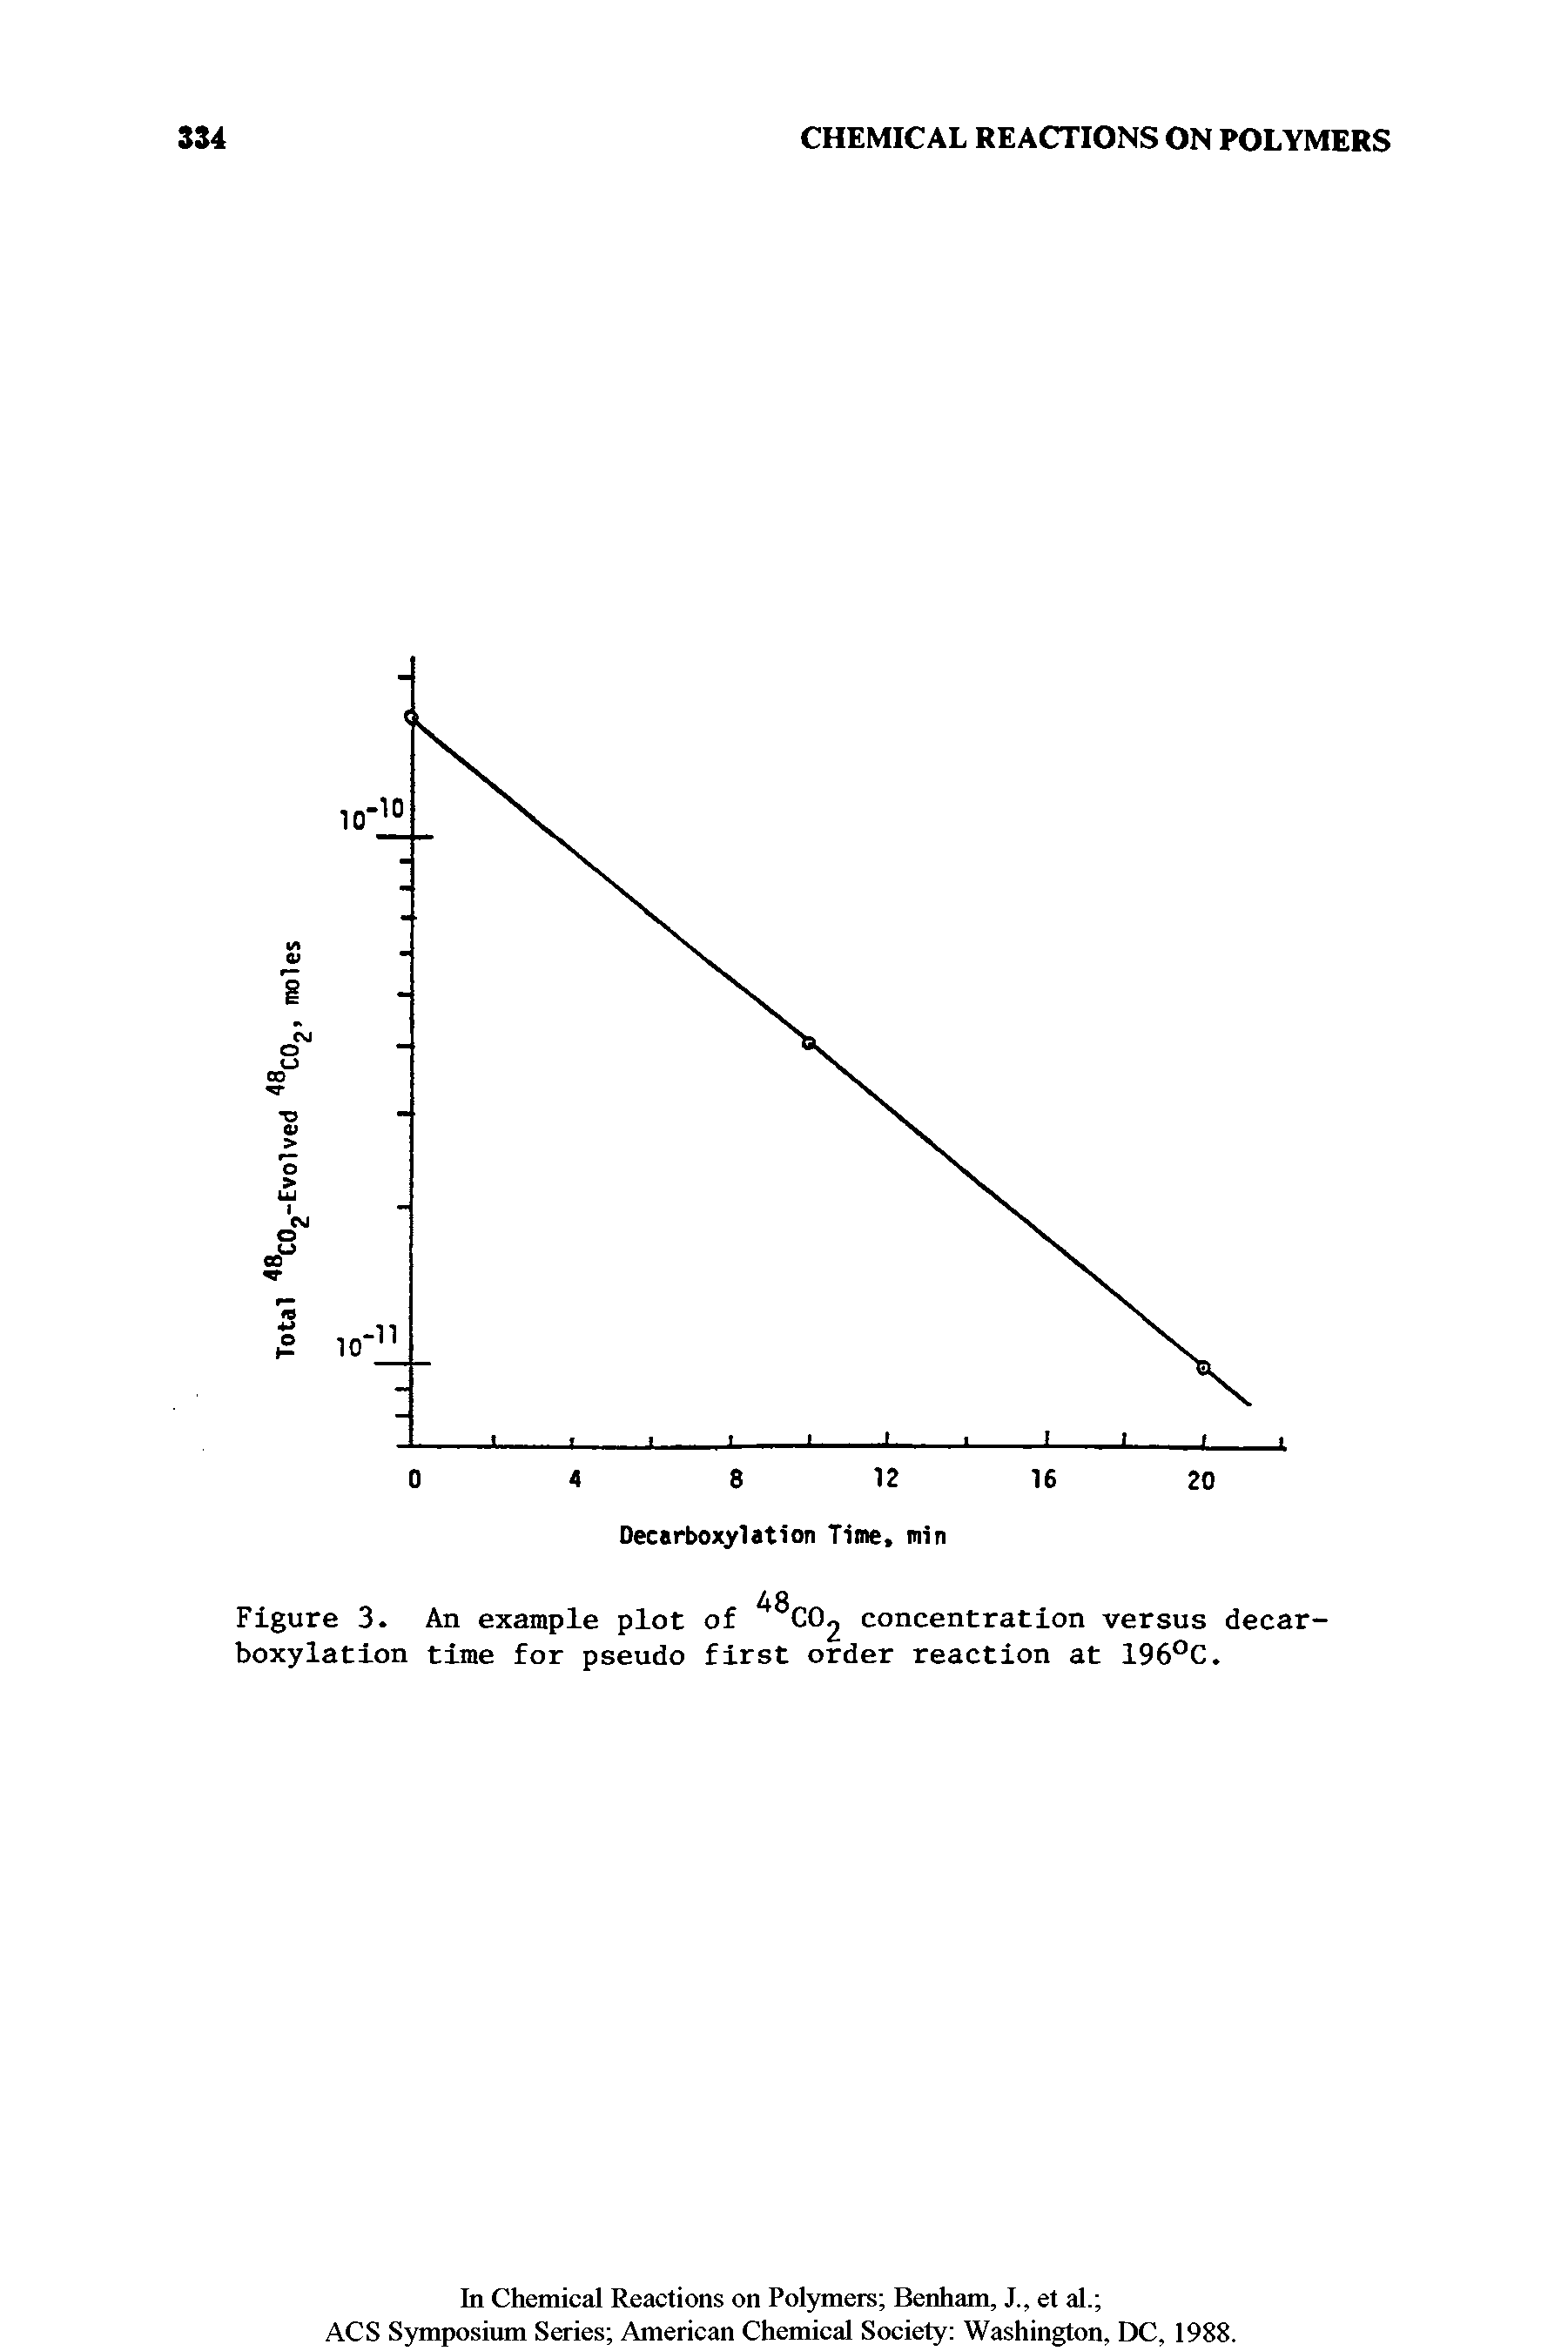 Figure 3. An example plot of CC concentration versus decarboxylation time for pseudo first order reaction at 196°C.